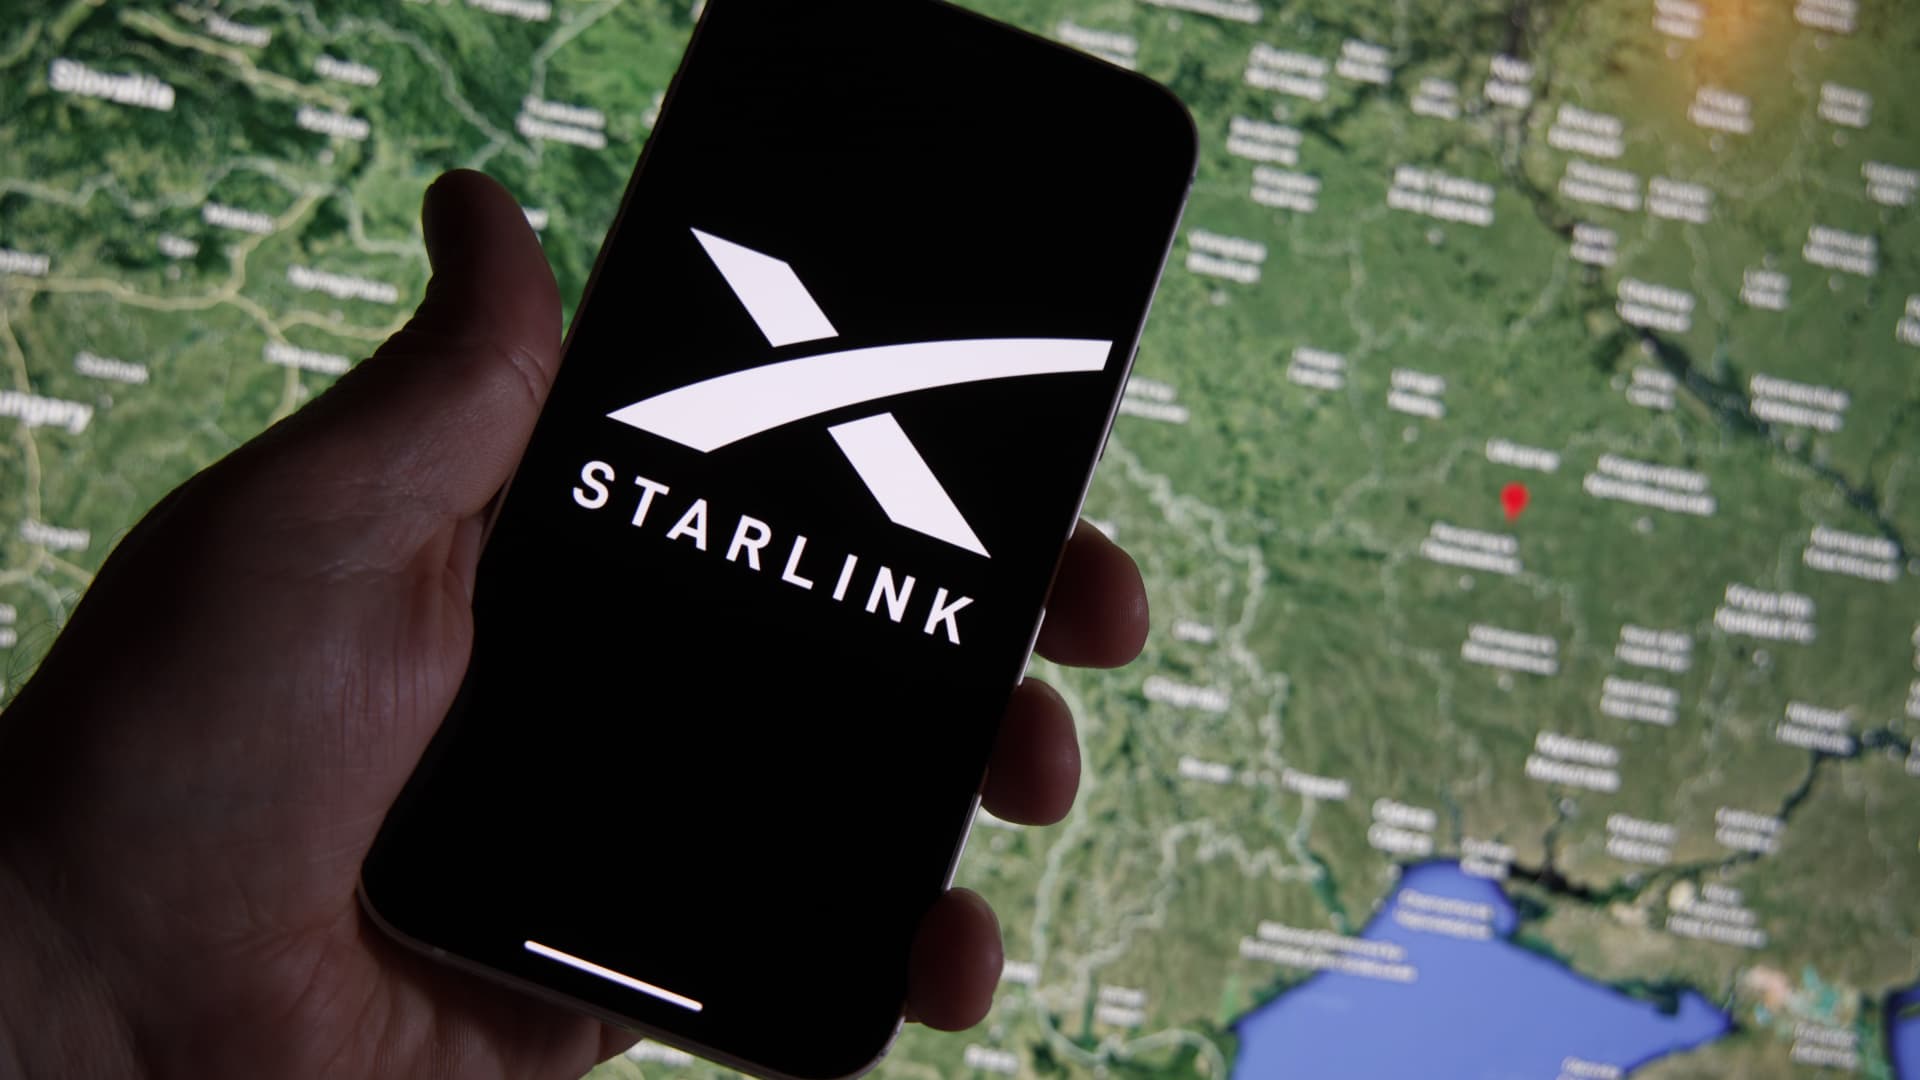 The Starlink photo is seen on a mobile device with Ukraine on a map in the background in this illustration photo in Warsaw, Poland on 21 September, 2022.